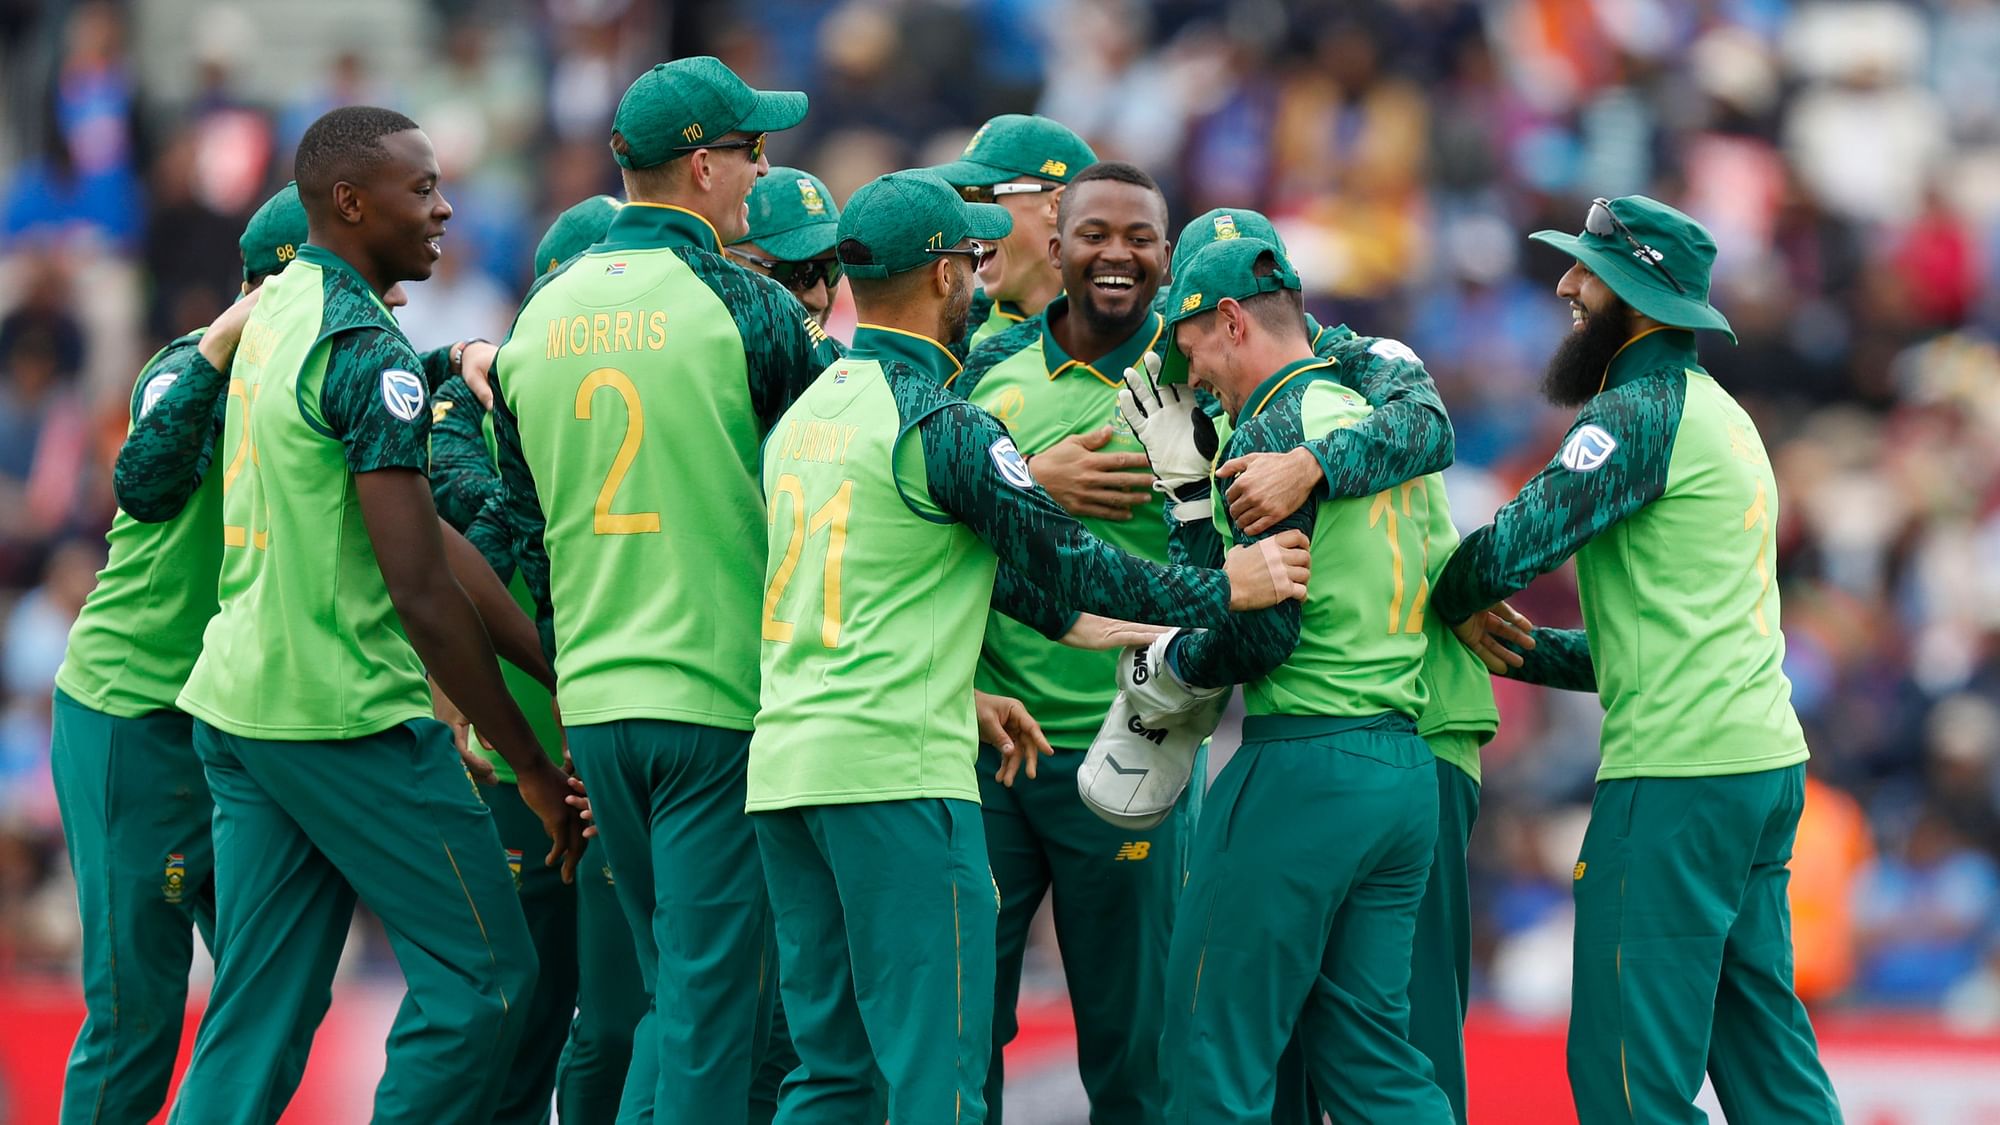 South Africa has now lost three matches on the trot.